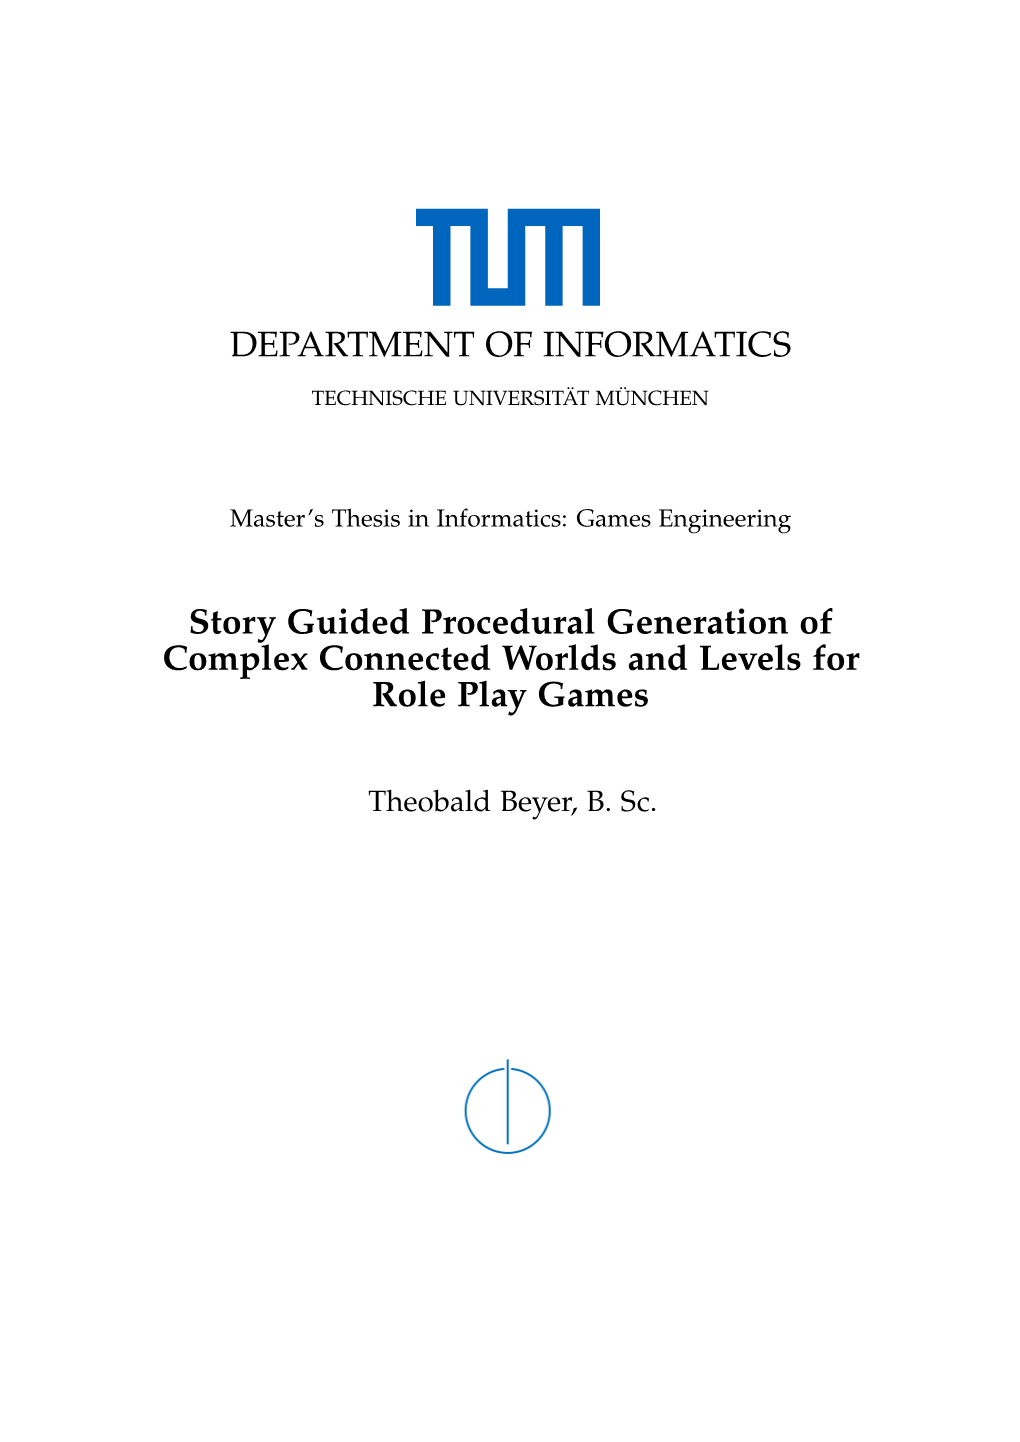 DEPARTMENT of INFORMATICS Story Guided Procedural